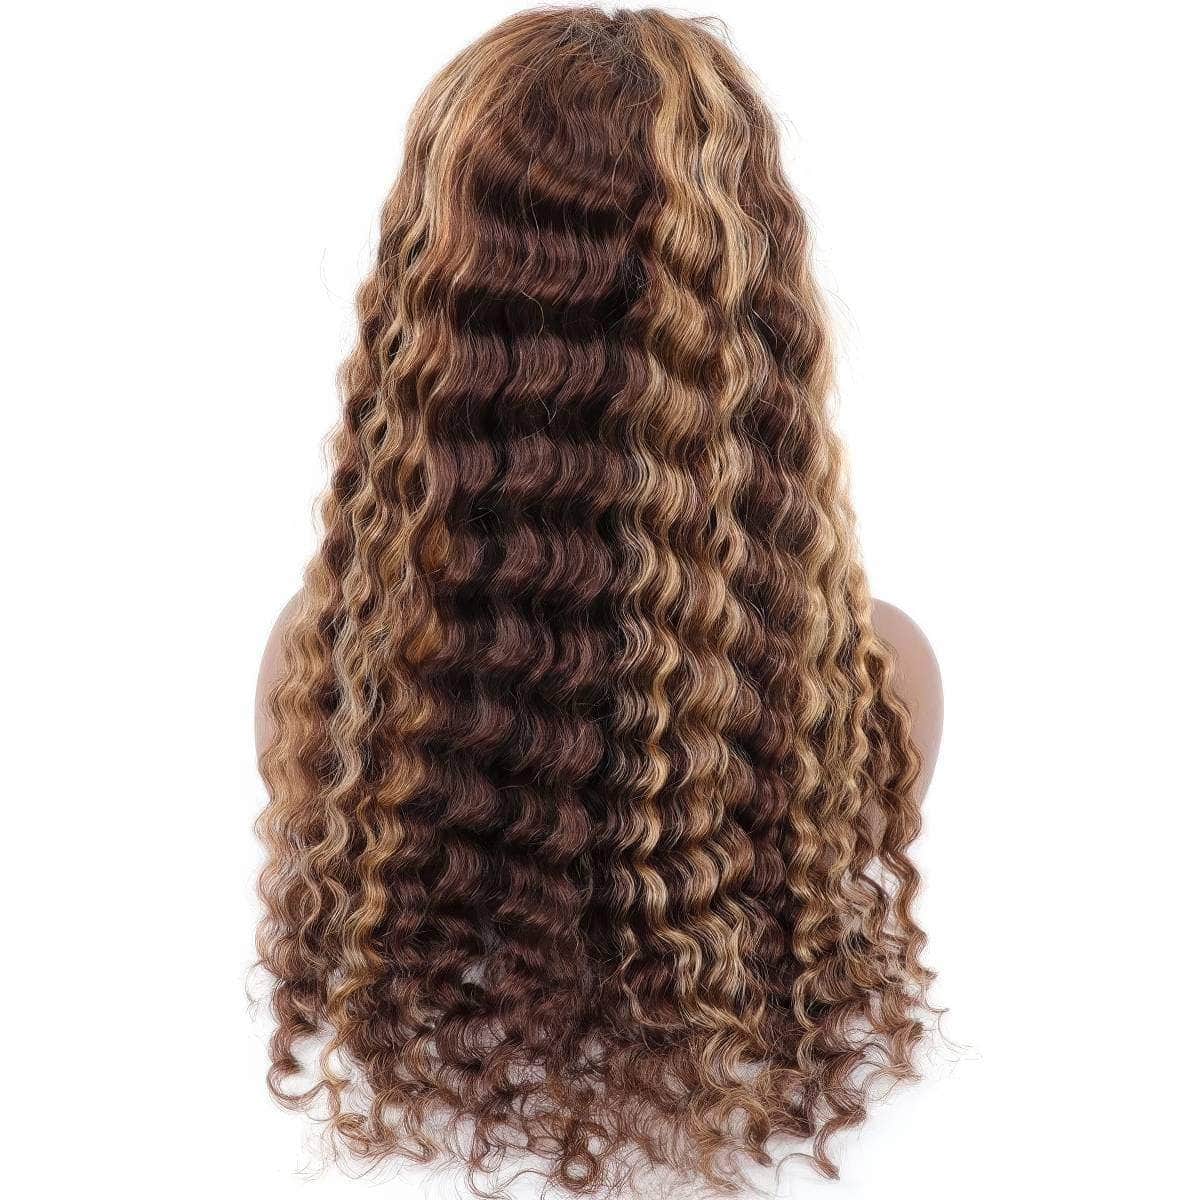 Ombre 4/27 Highlight Brazilian Deep Wave Glueless Wig - Wear And Go, 6x4 HD Lace, Pre-Plucked, Human Wigs Ready To Go